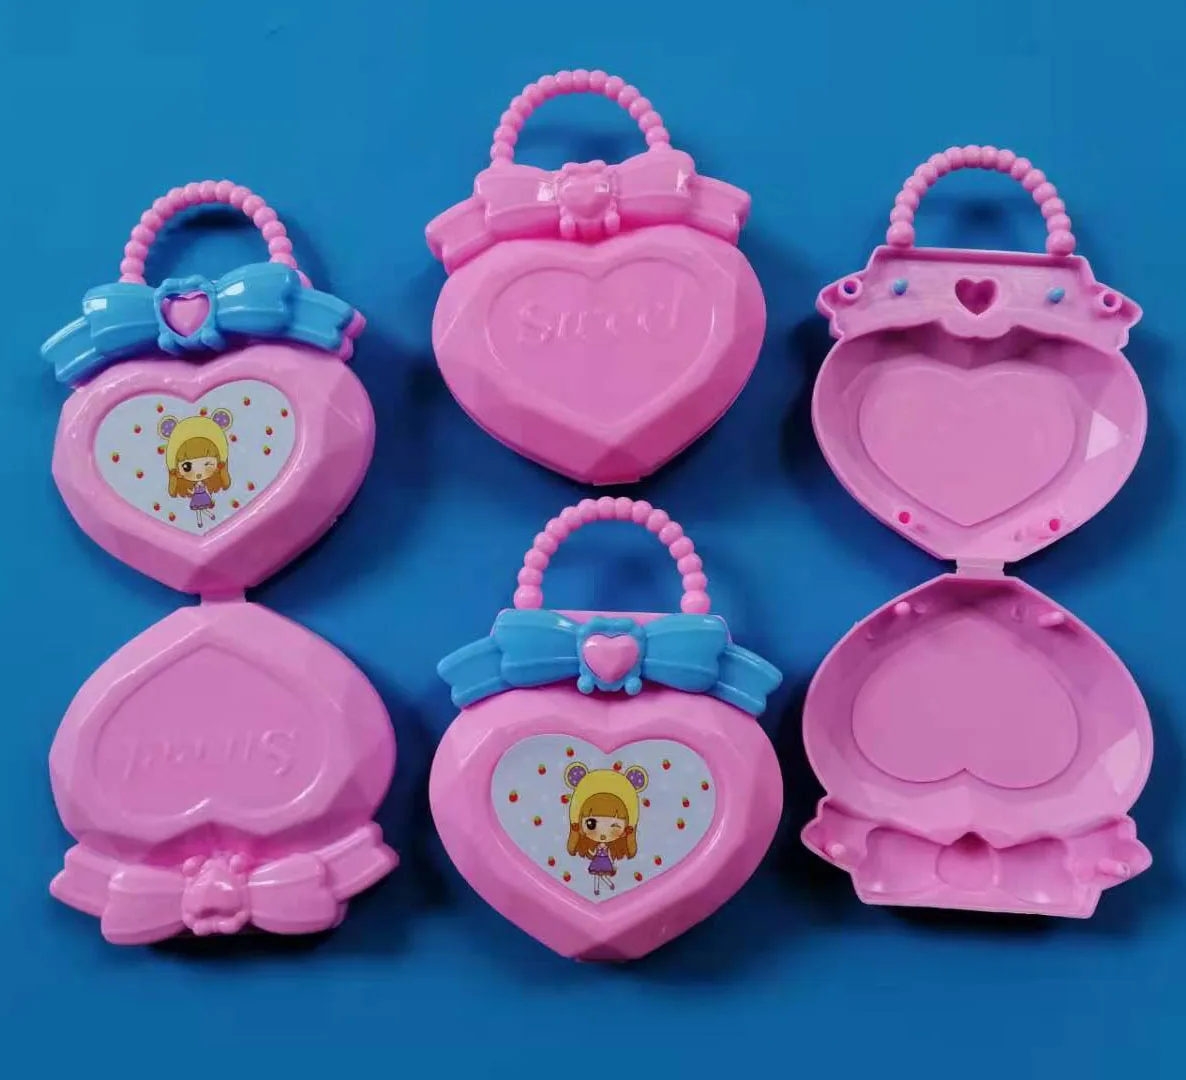 Beilinda Toys Plastic Toys  Fashion Bag Butterfly Heart Bag Heart Sticker Sweet Handbag In Mix Colour 4pcs In One Lot 10pcs kiss clasps locks clips plastic arch frame candy colors fashion purse coin bag diy handbag handle findings 16cm